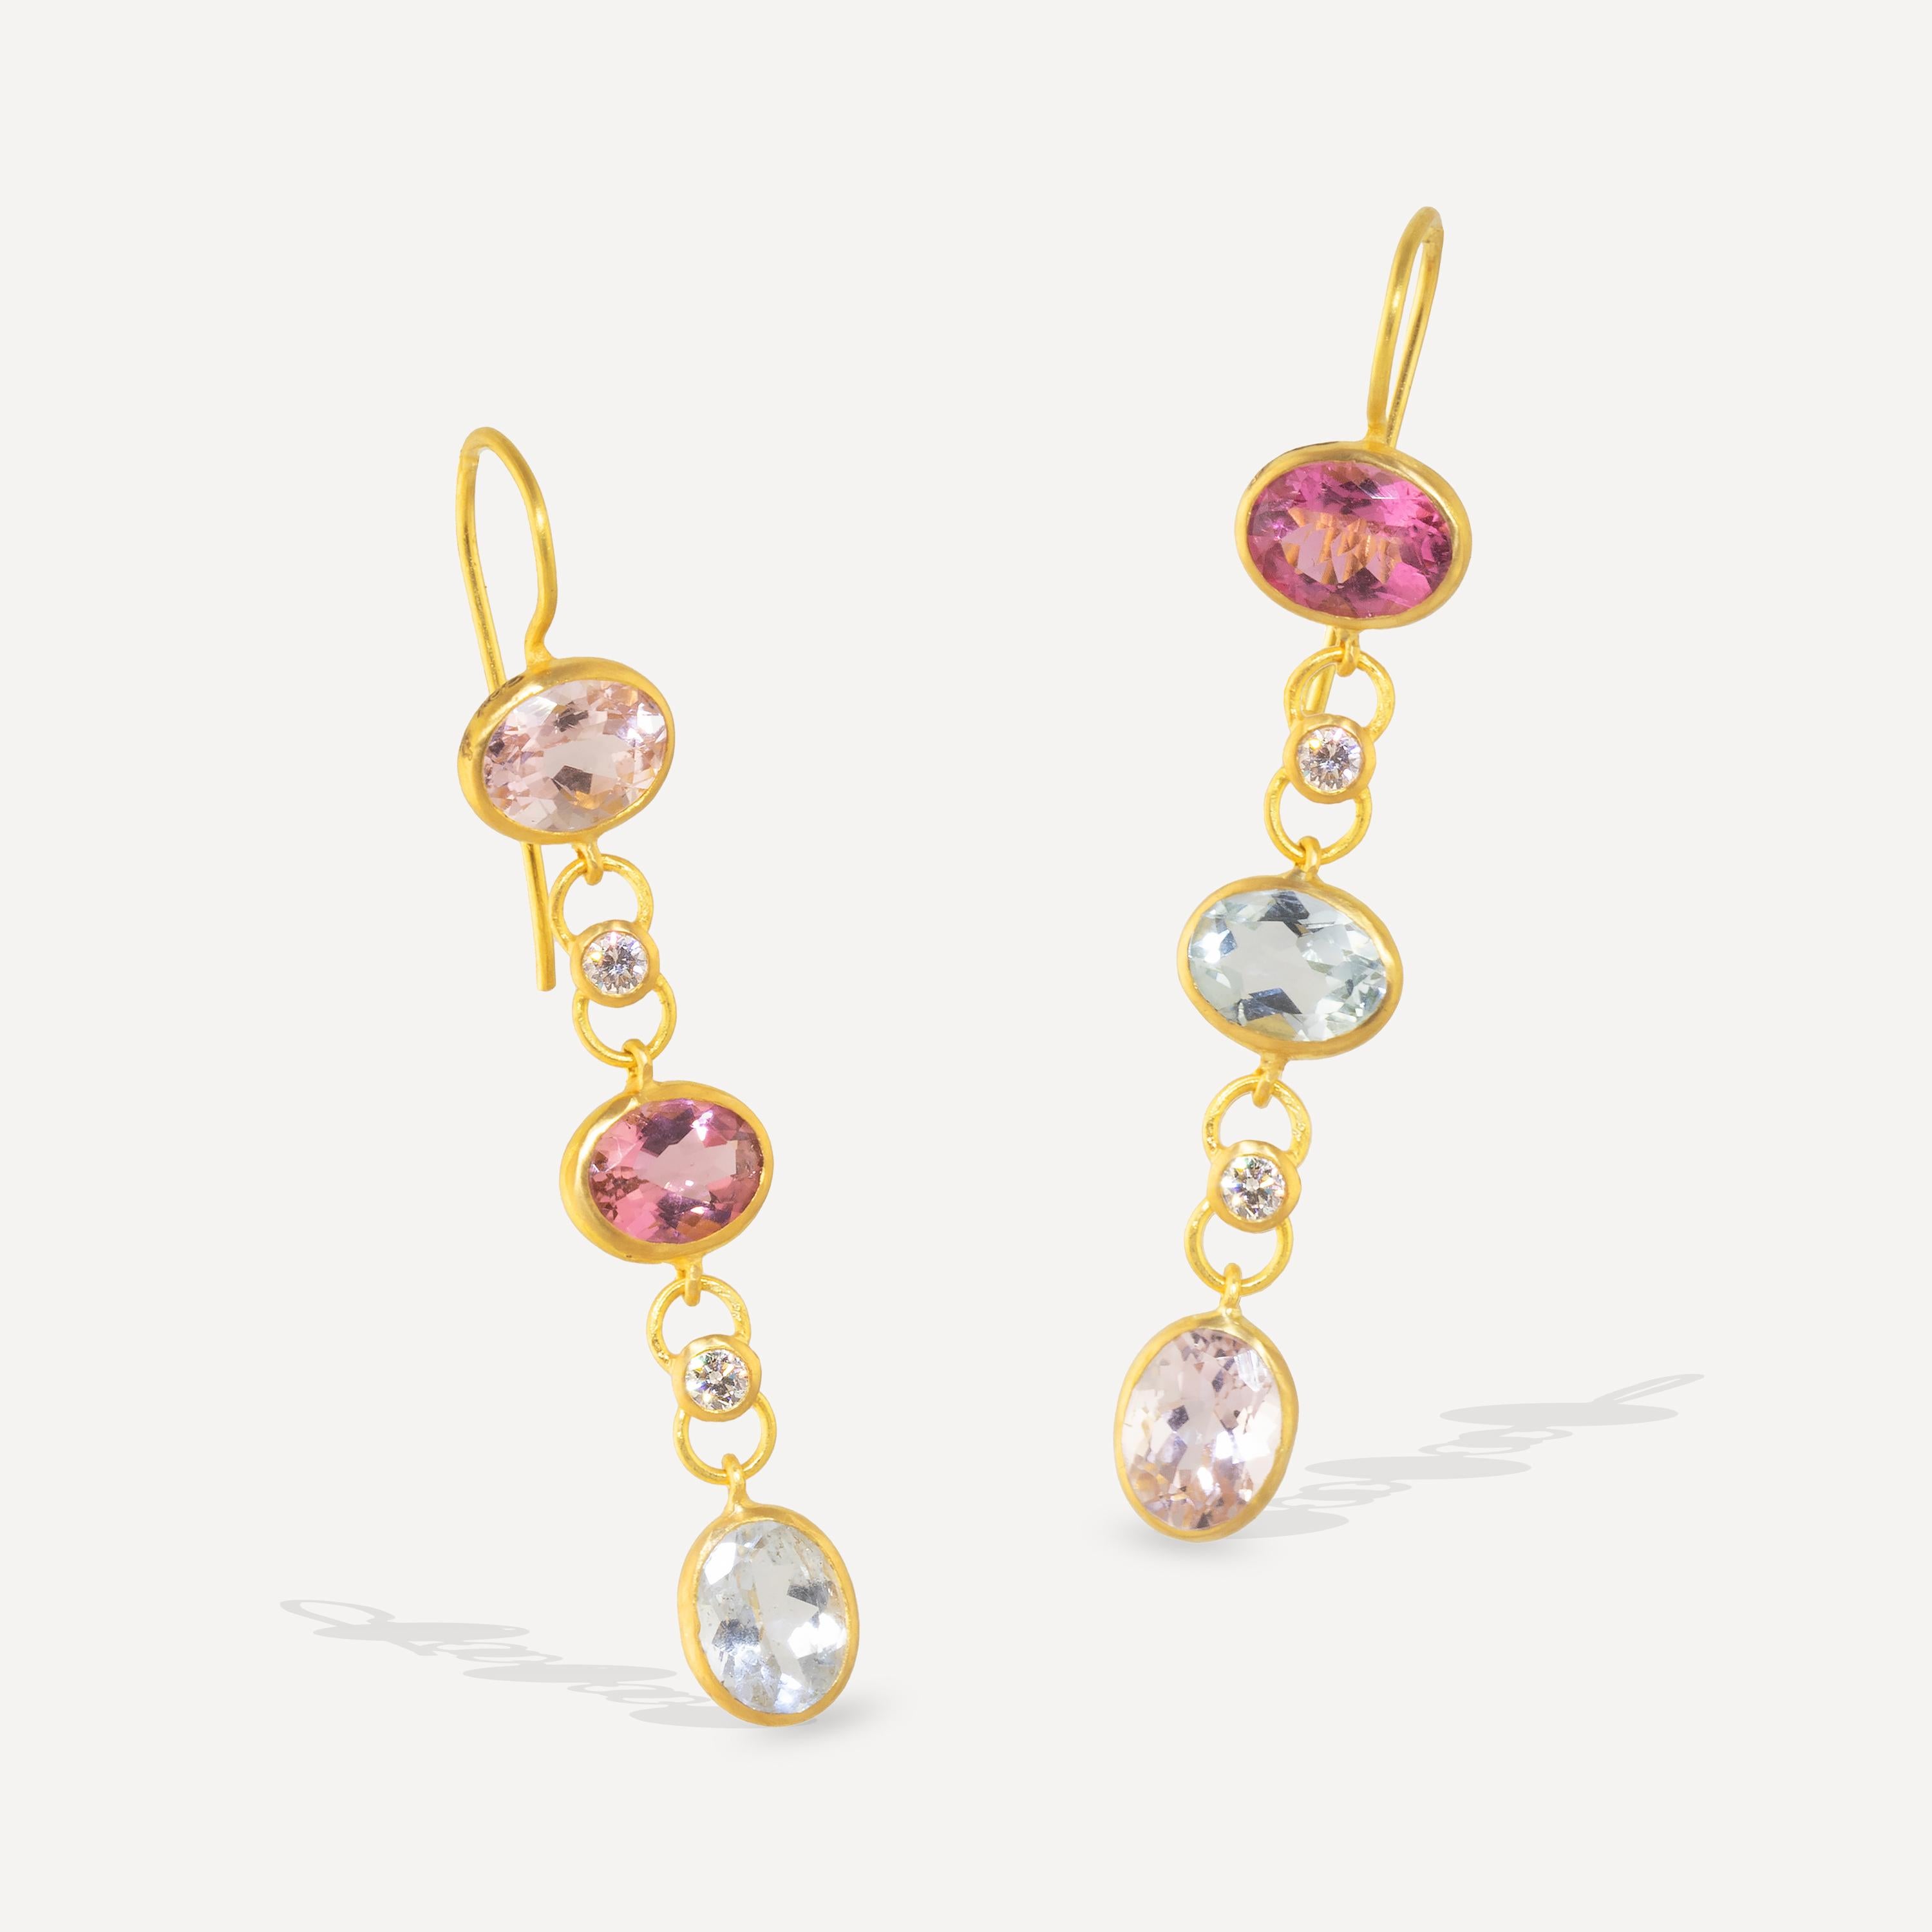 Multicolored tourmaline and  diamonds are highlighted in these spectacular earrings, hand-made at out workshop in Jaipur in 22k gold.
Featuring 8.4 carats of Multi-colored pastel tourmalines and .40carats of VVS F+ diamonds.

Drops measure 48mm Long